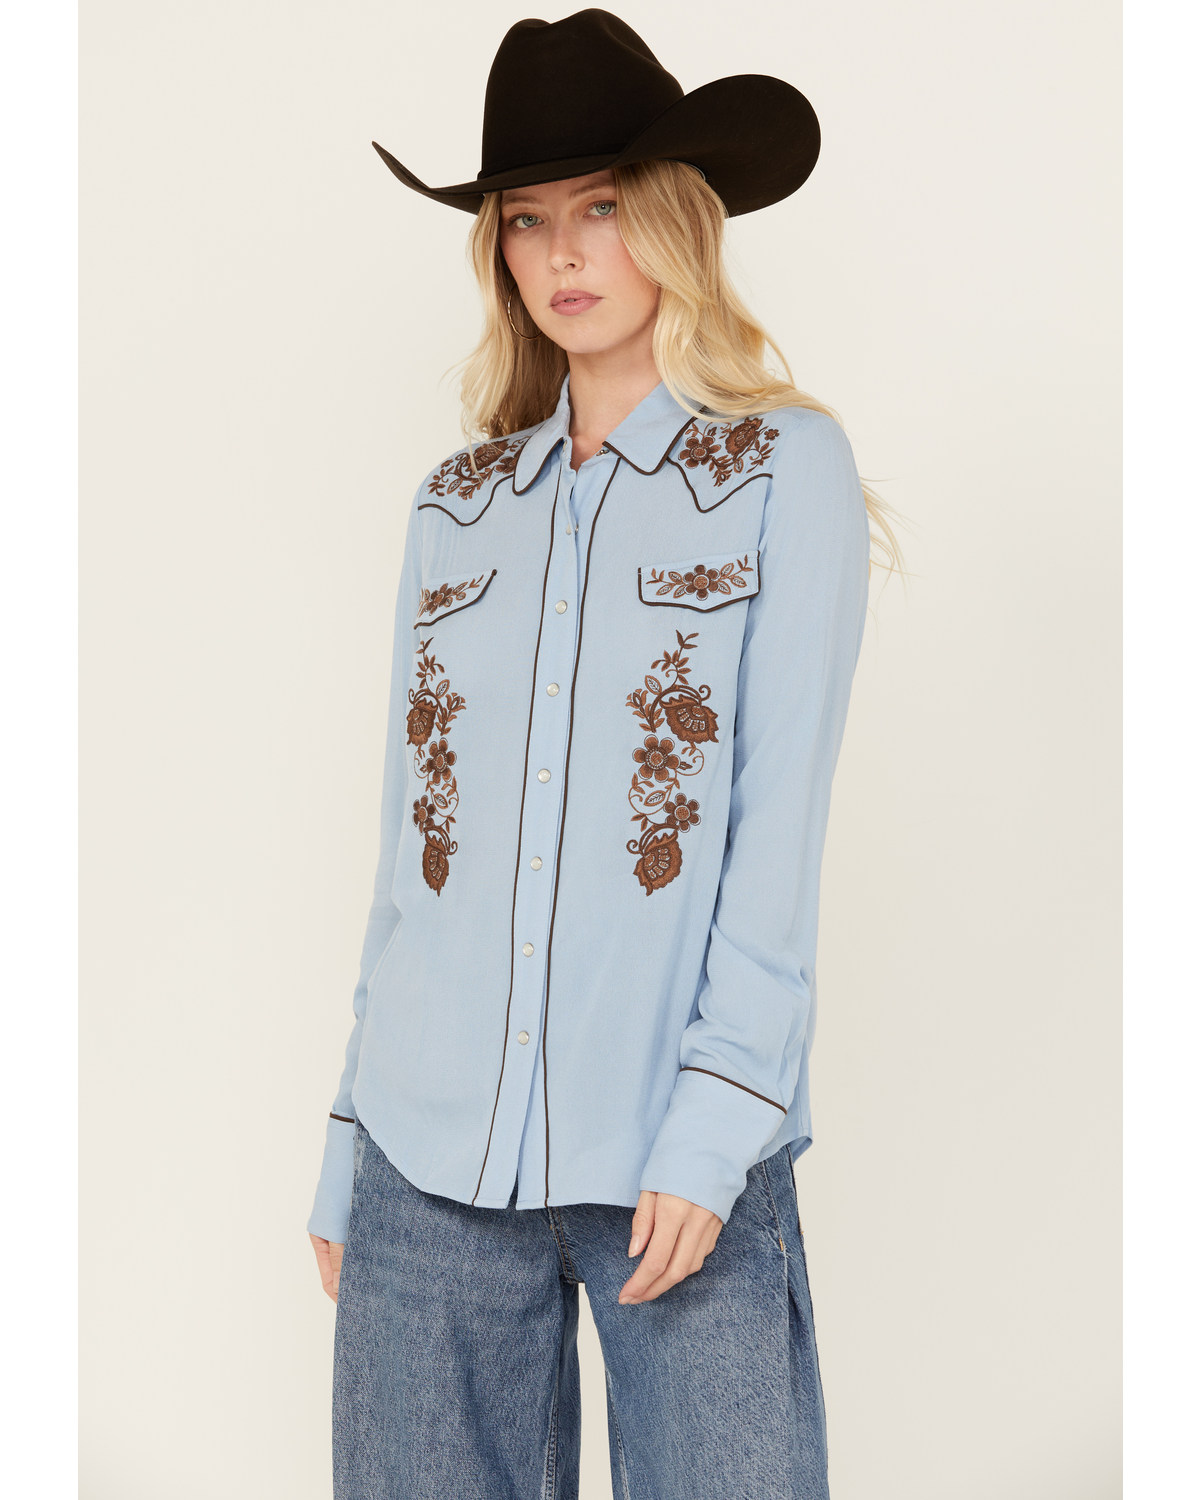 Stetson Women's Embroidered Long Sleeve Pearl Snap Western Blouse